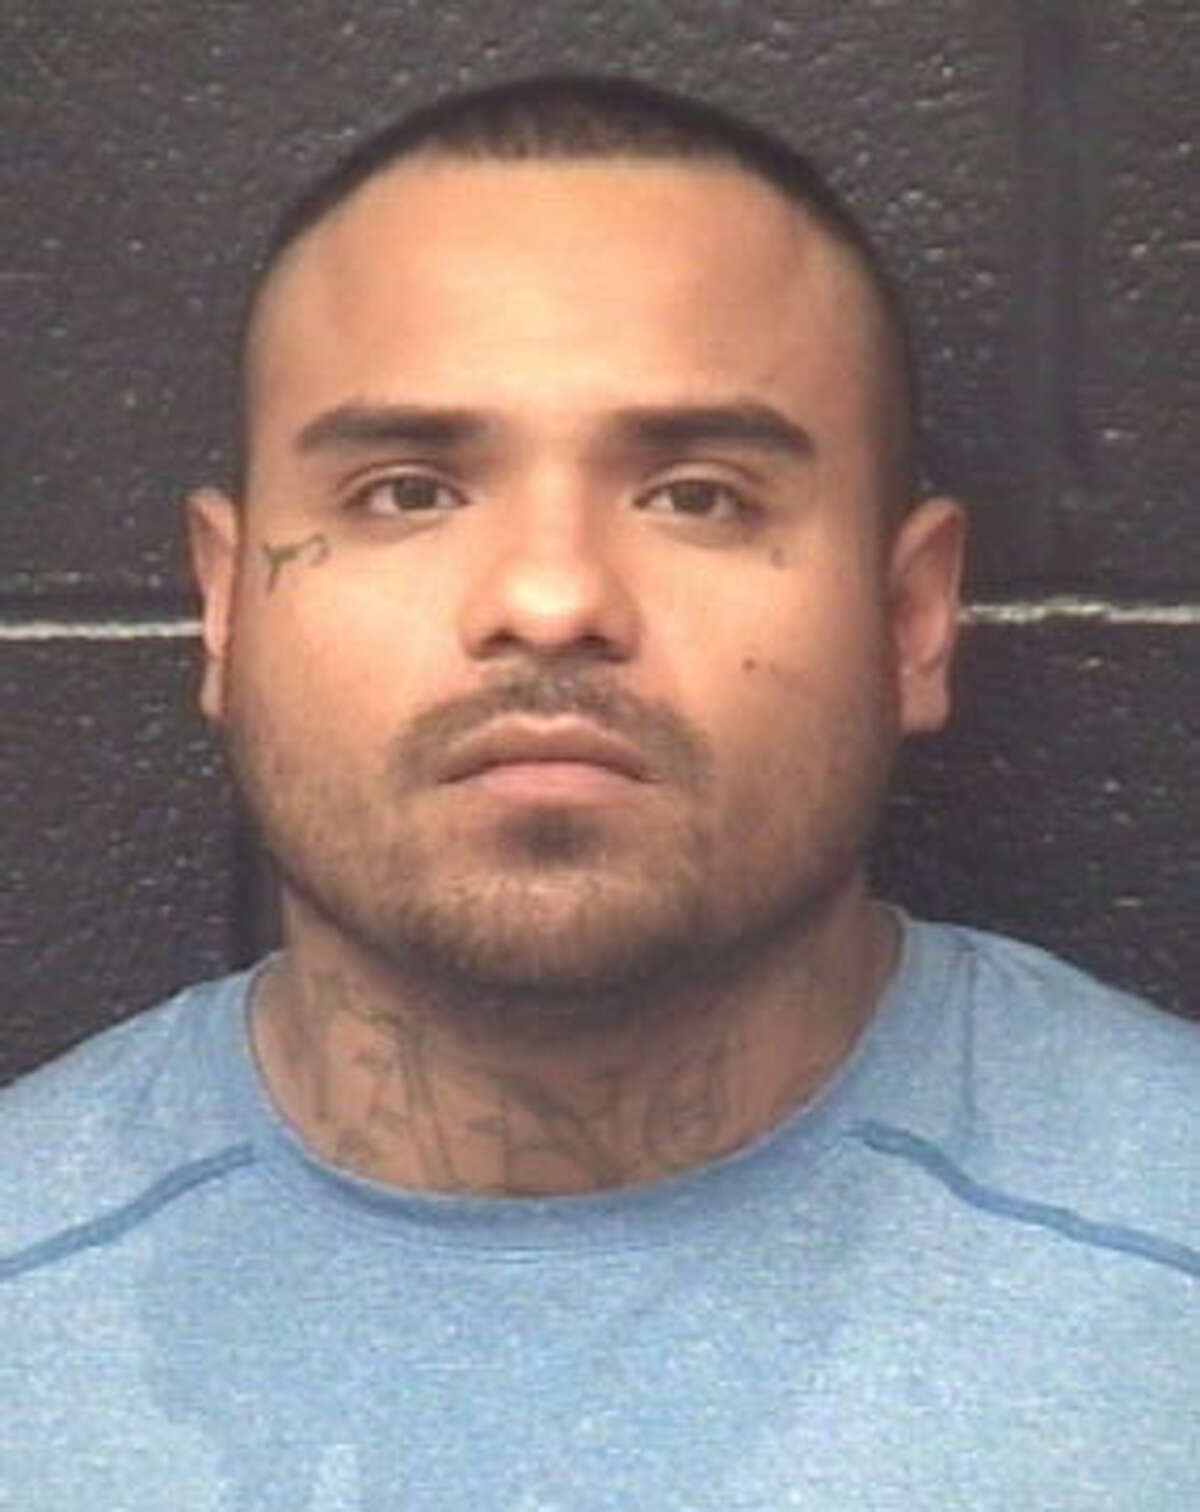 Brownsville police arrest man wanted for burglary and theft